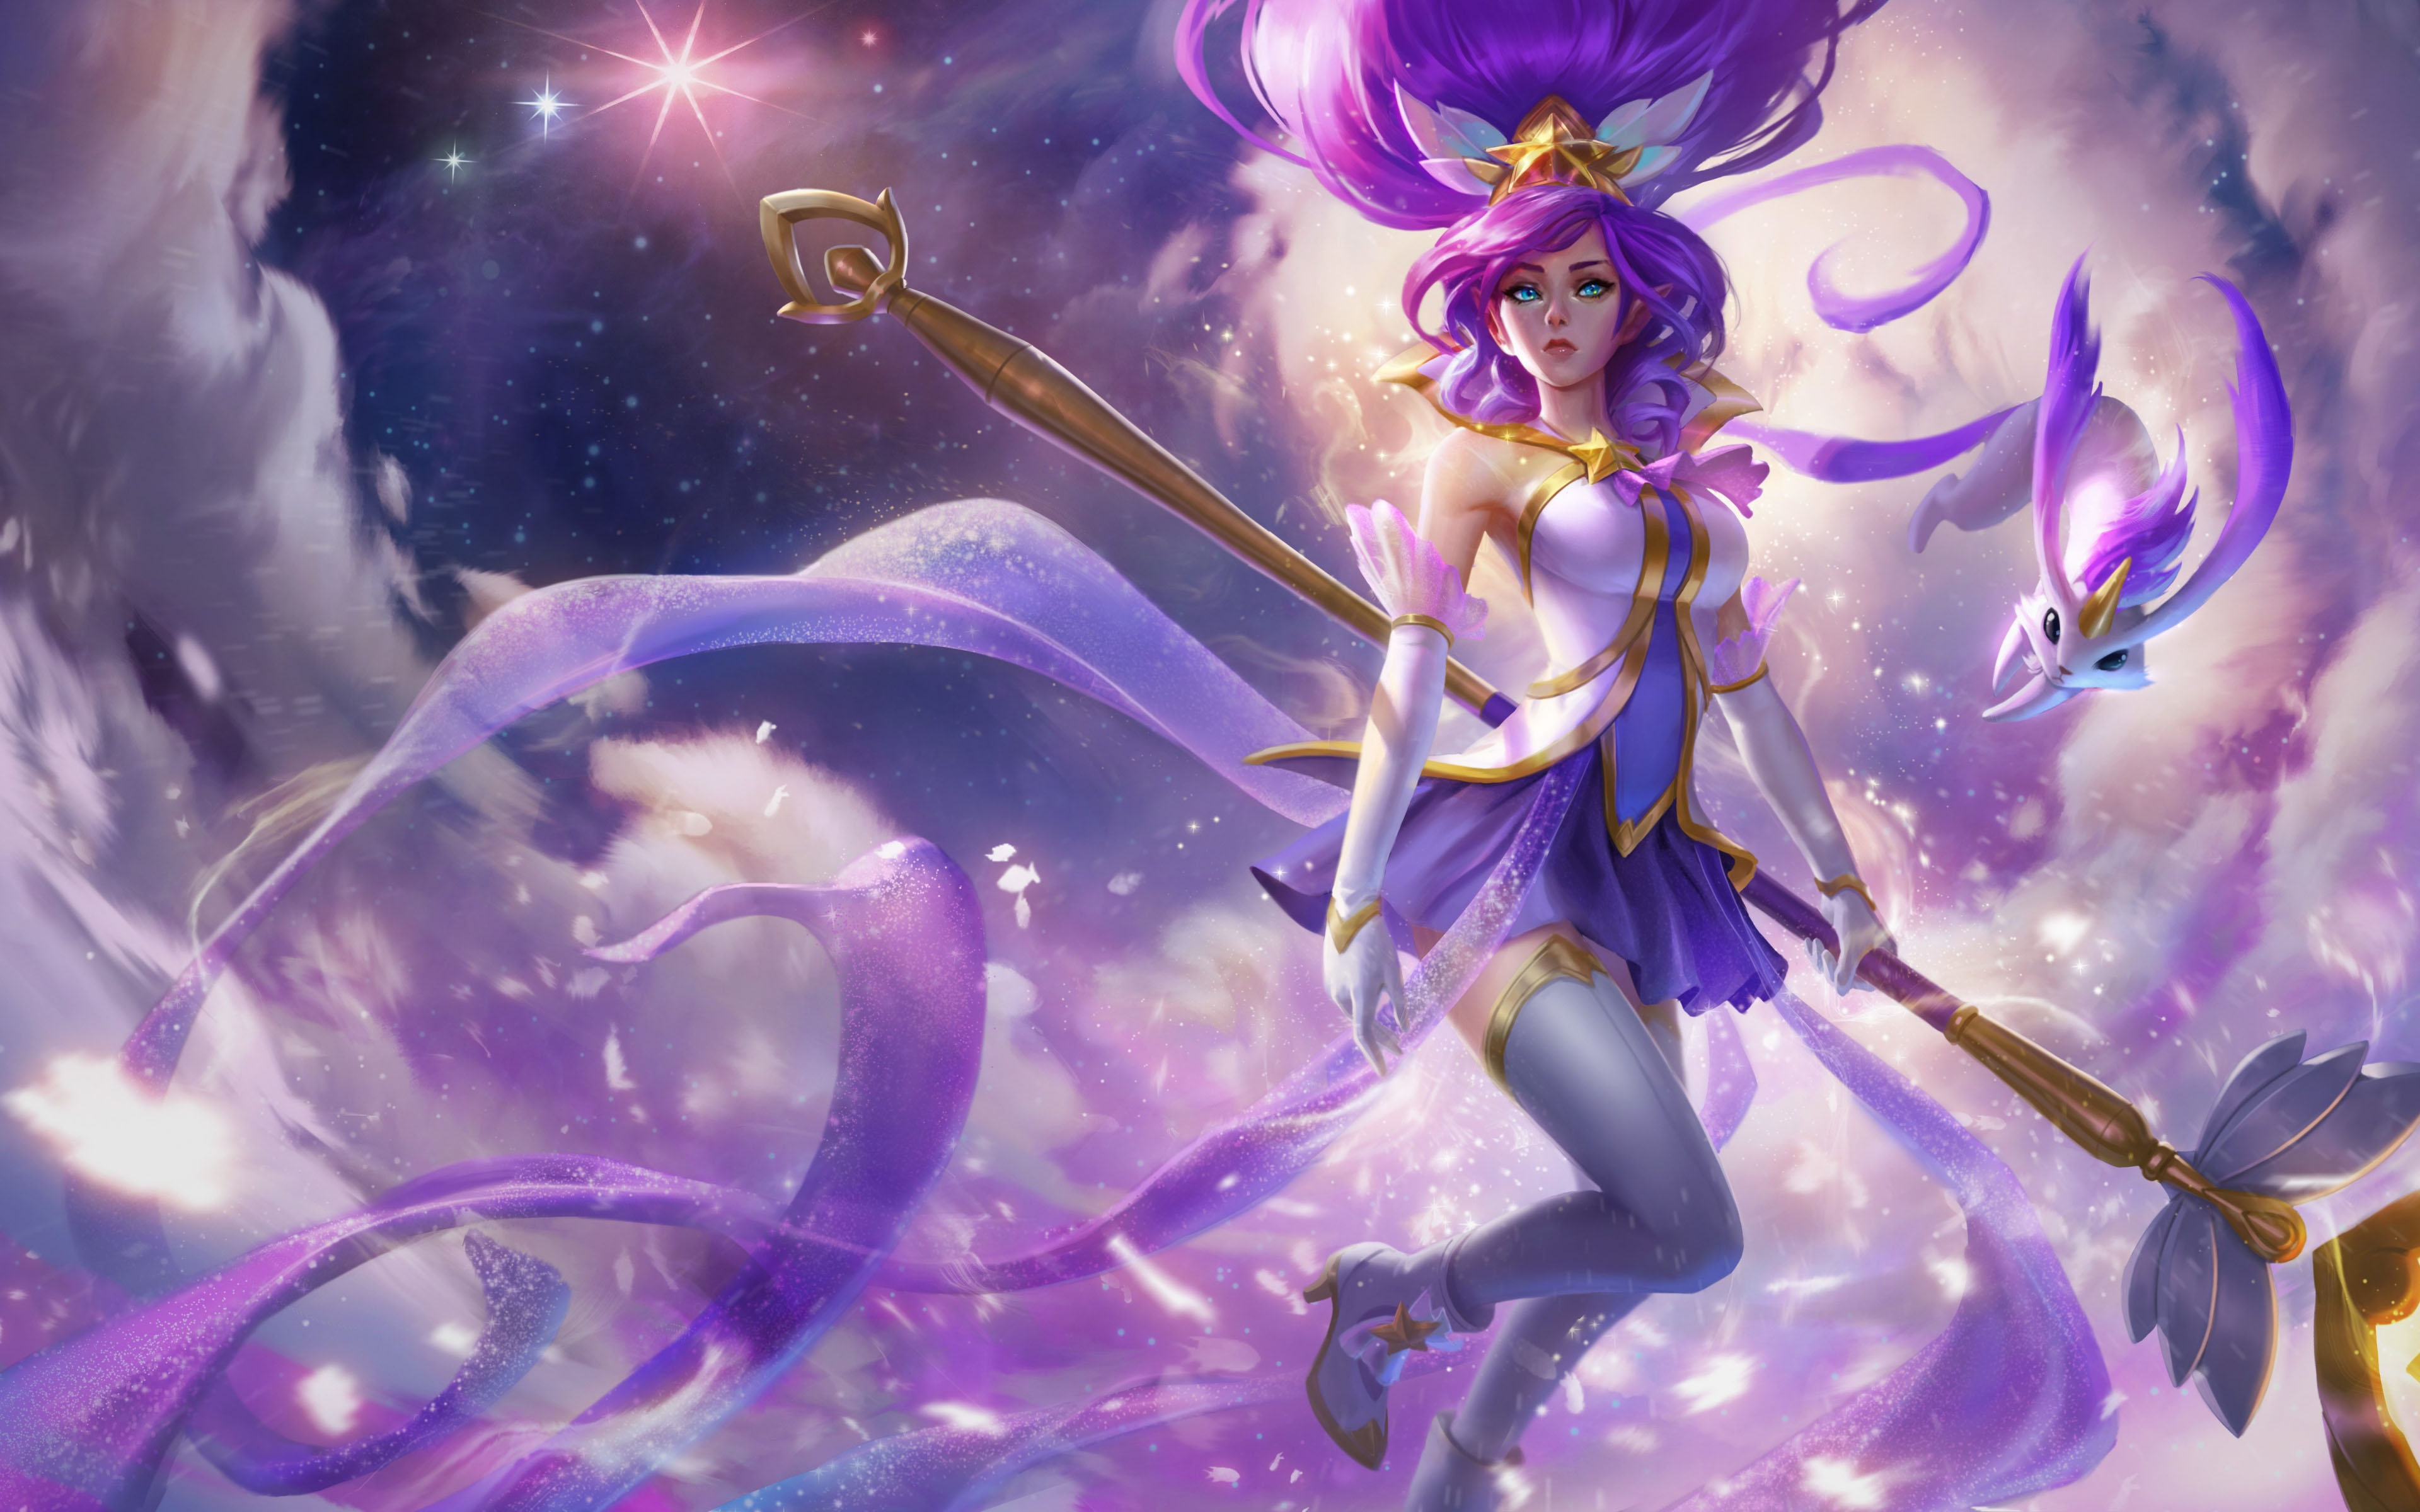 League Of Legends Lux The Lady Of Luminosity Roles Mage Support Splash Art  Hd Wallpapers High Definition 1920x1080  Wallpapers13com